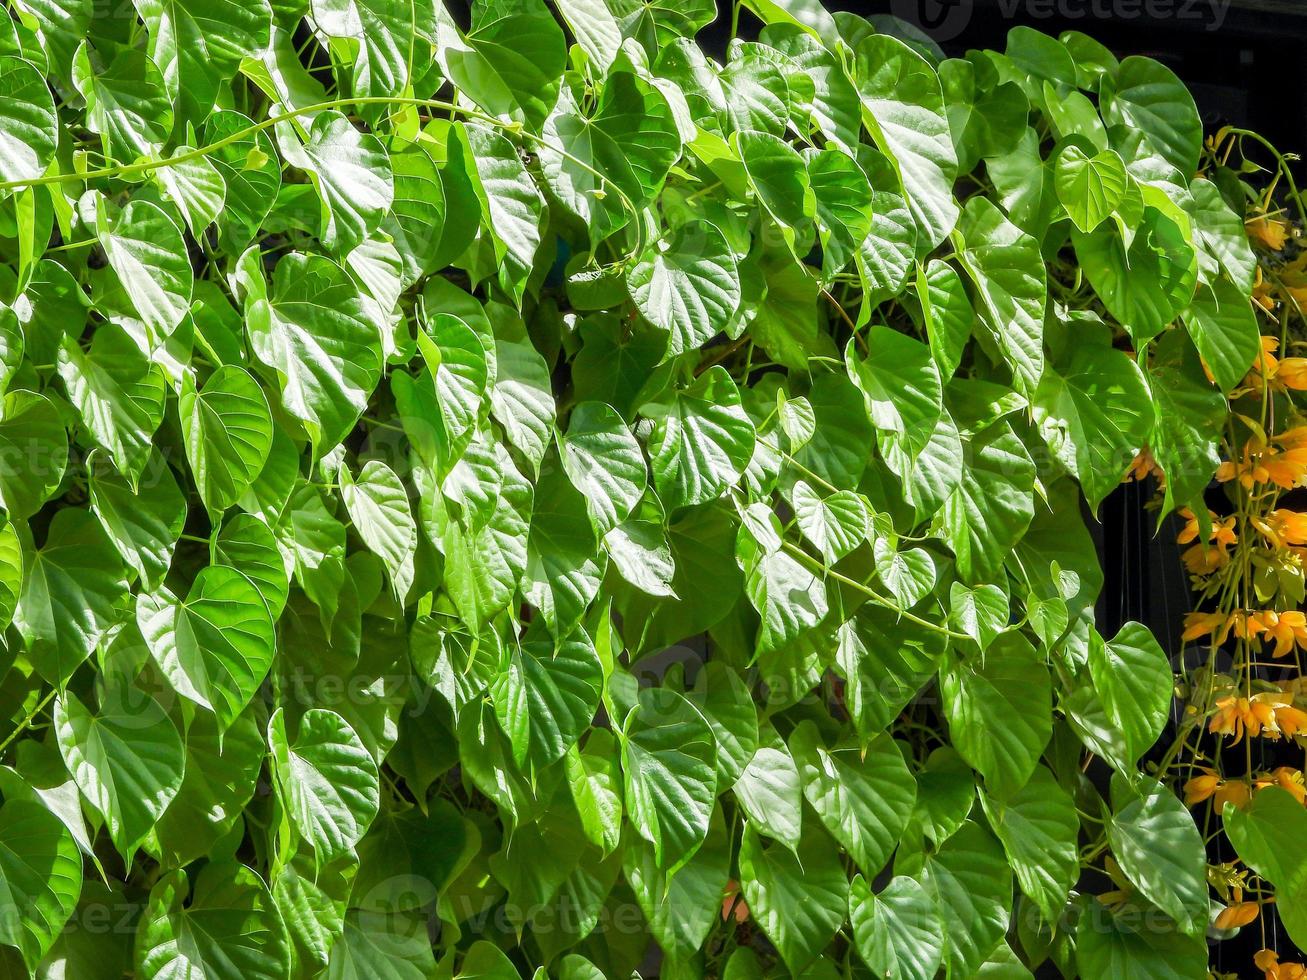 Tinospora cordifolia local name guduchi, and giloy, is an herbaceous vine of the family Menispermaceae indigenous to the tropical areas of India use as Ayurveda medicine photo